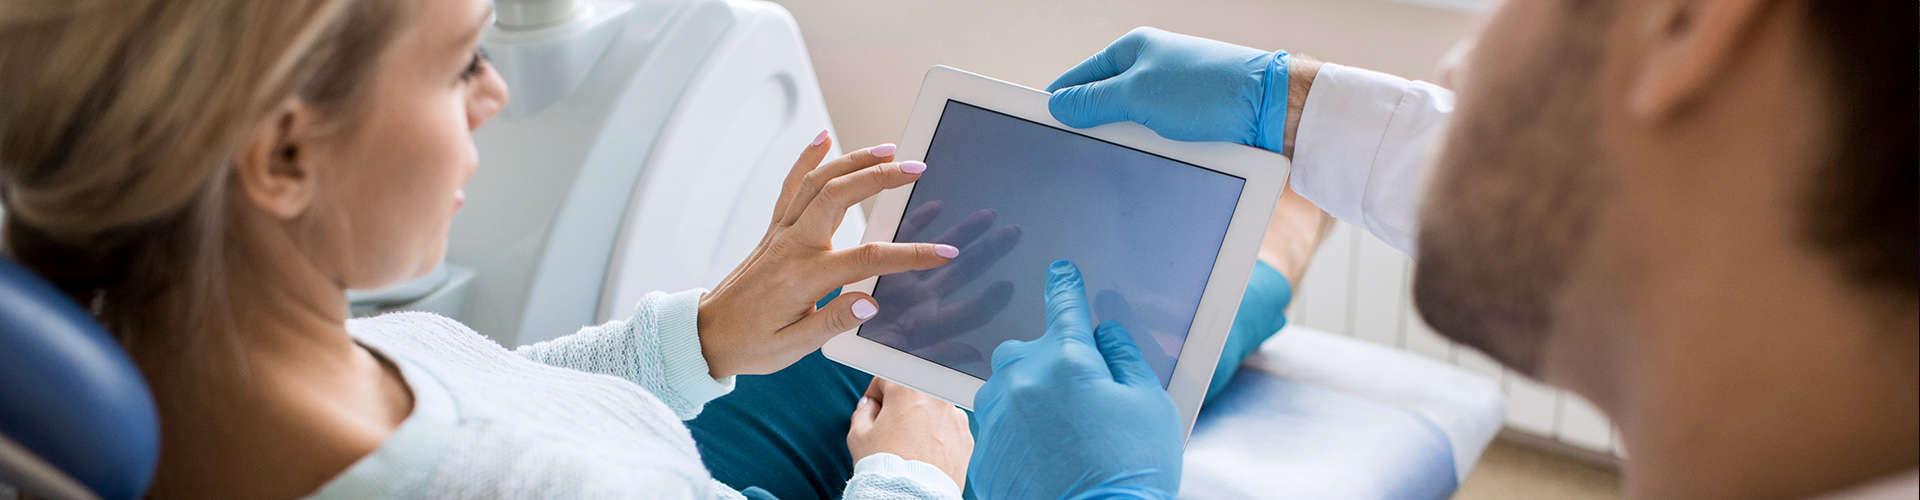 Dental professional and female patient pointing at digital tablet.